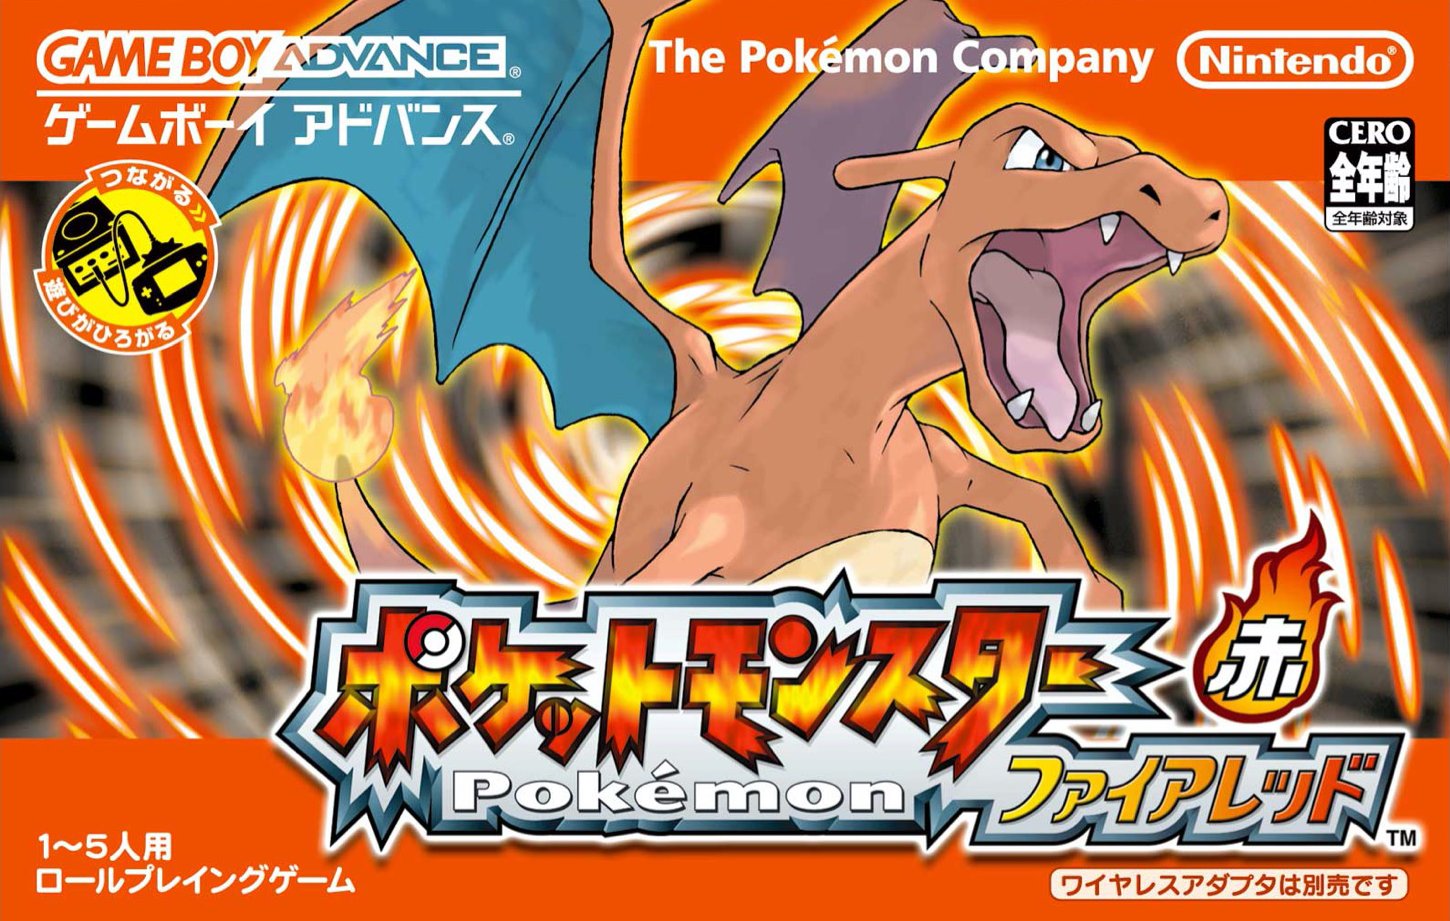 Bulbapedia "Today is the 19th anniversary of Pokémon FireRed and LeafGreen Versions, first released in Japan for the Nintendo Game Boy on January 29, 2004! games revisit the